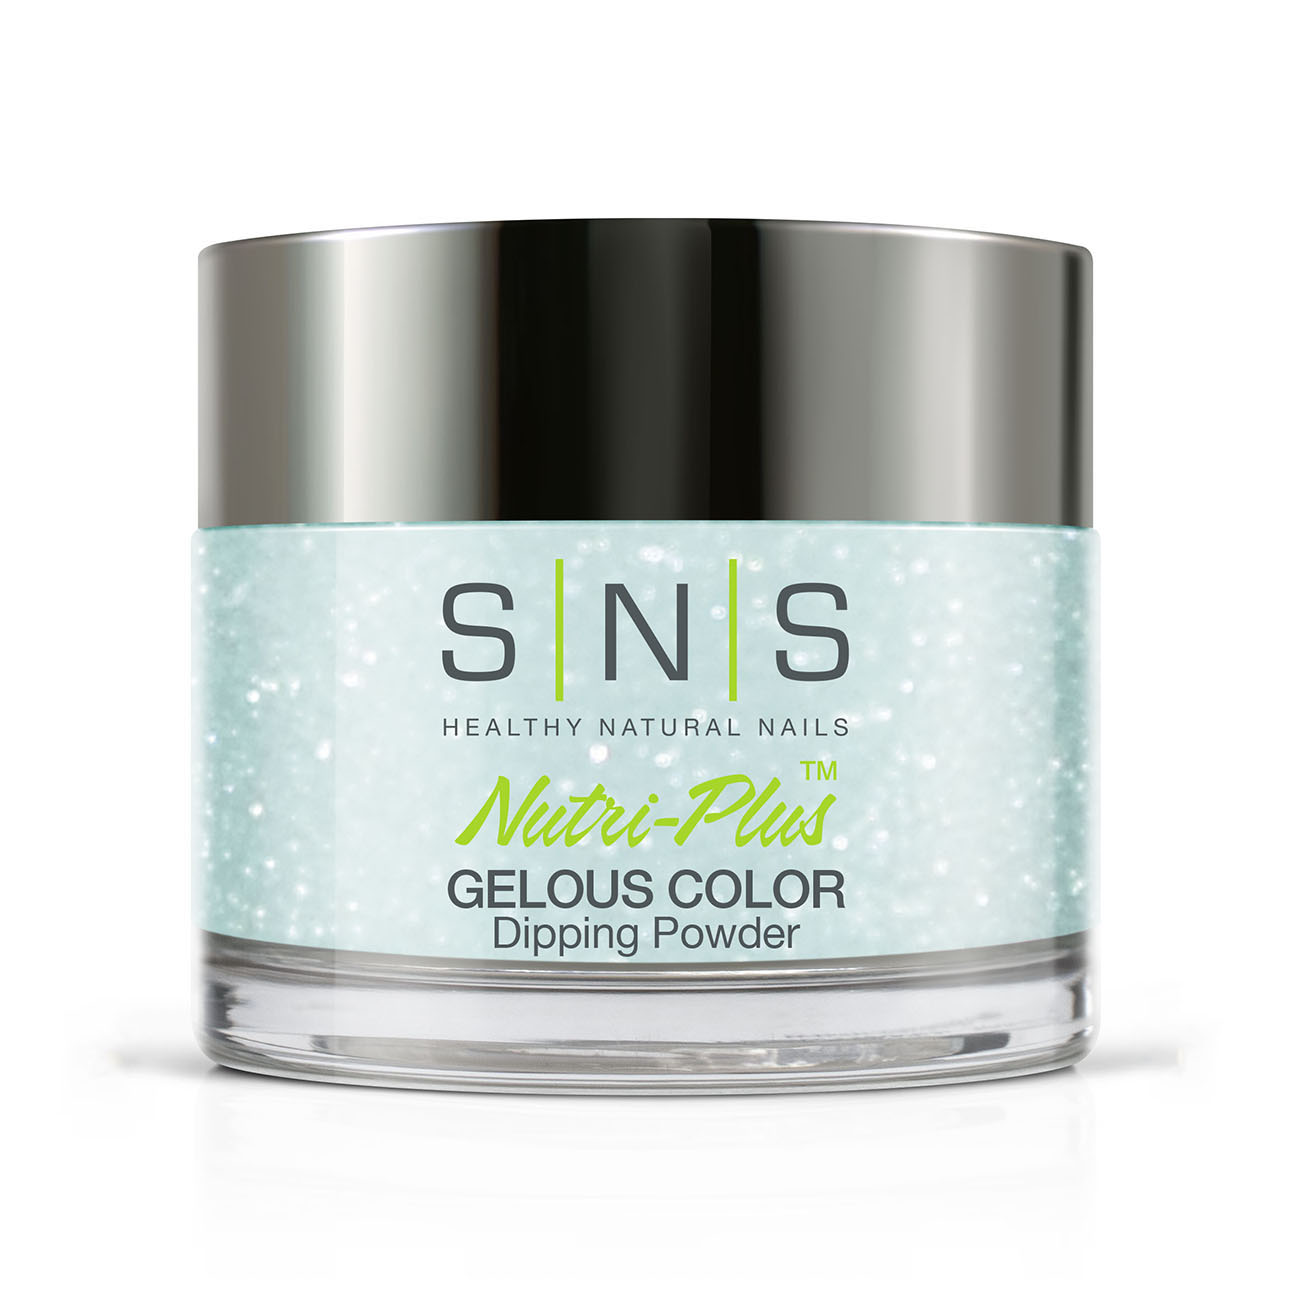 SNS Nails SP08 Head Out Like a Baby 28g (1oz) | Gelous Dipping Powder